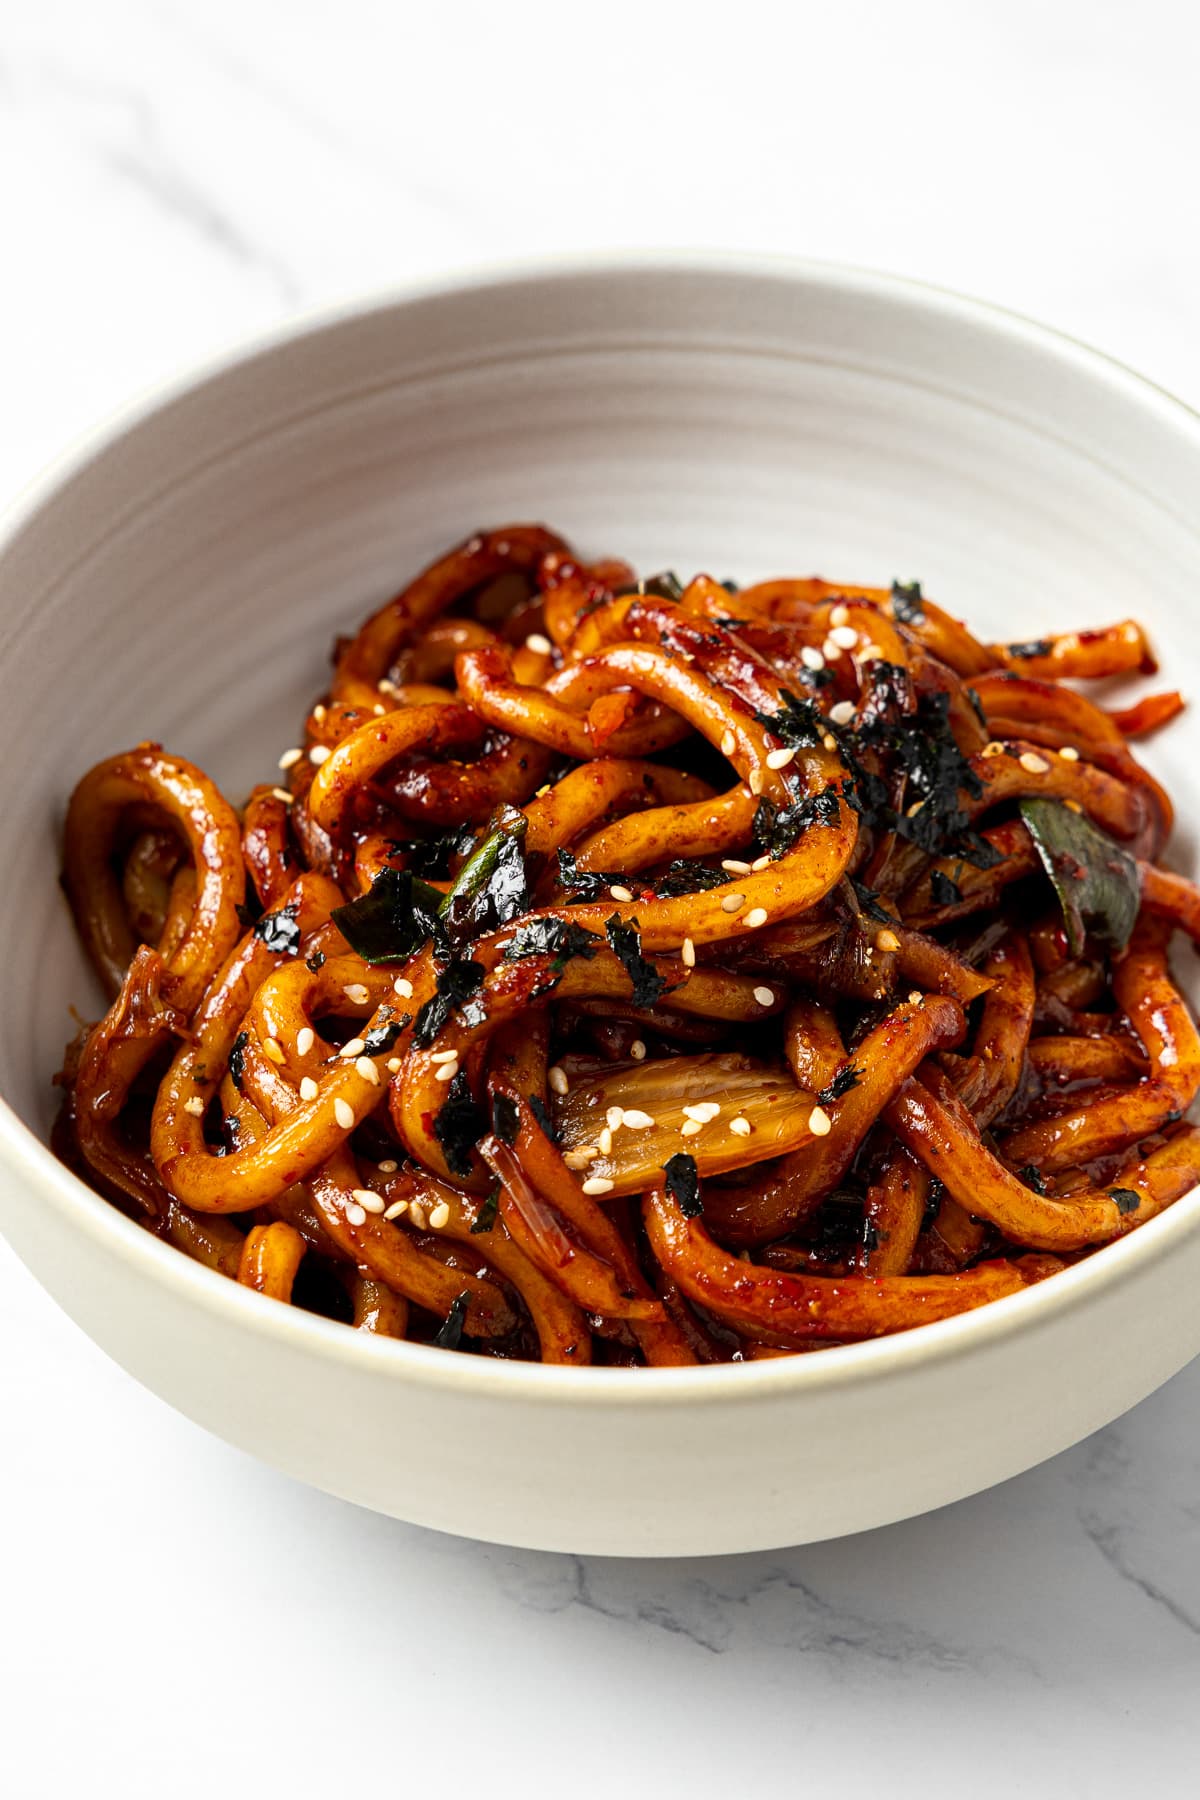 kimchi udon in a bowl garnished with chopped roasted seaweed and sesame seeds